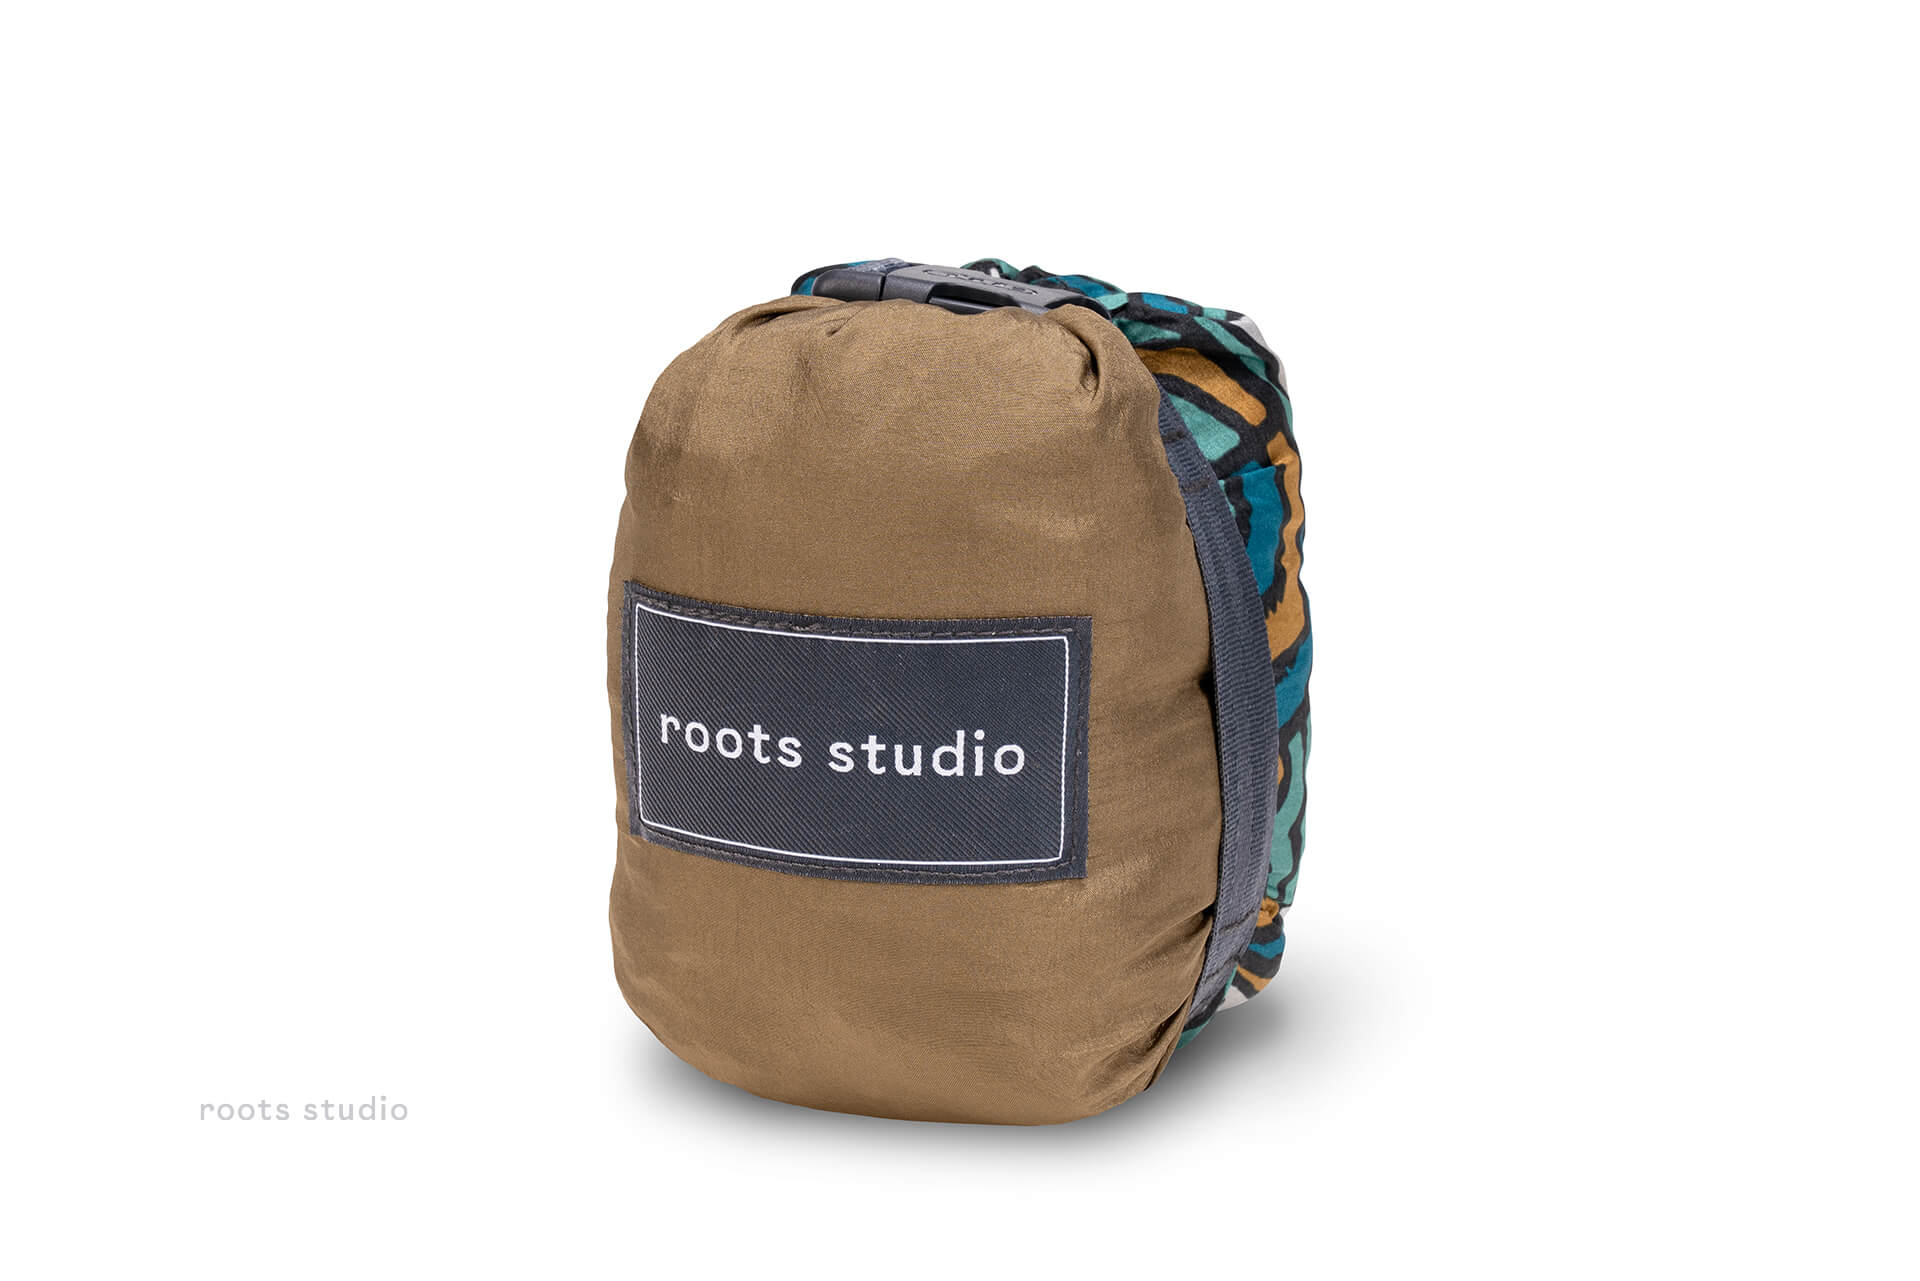 Eagles Nest Outfitters, Inc. Giving Back Hammock, ENO Roots Studio DoubleNest Hammock Print